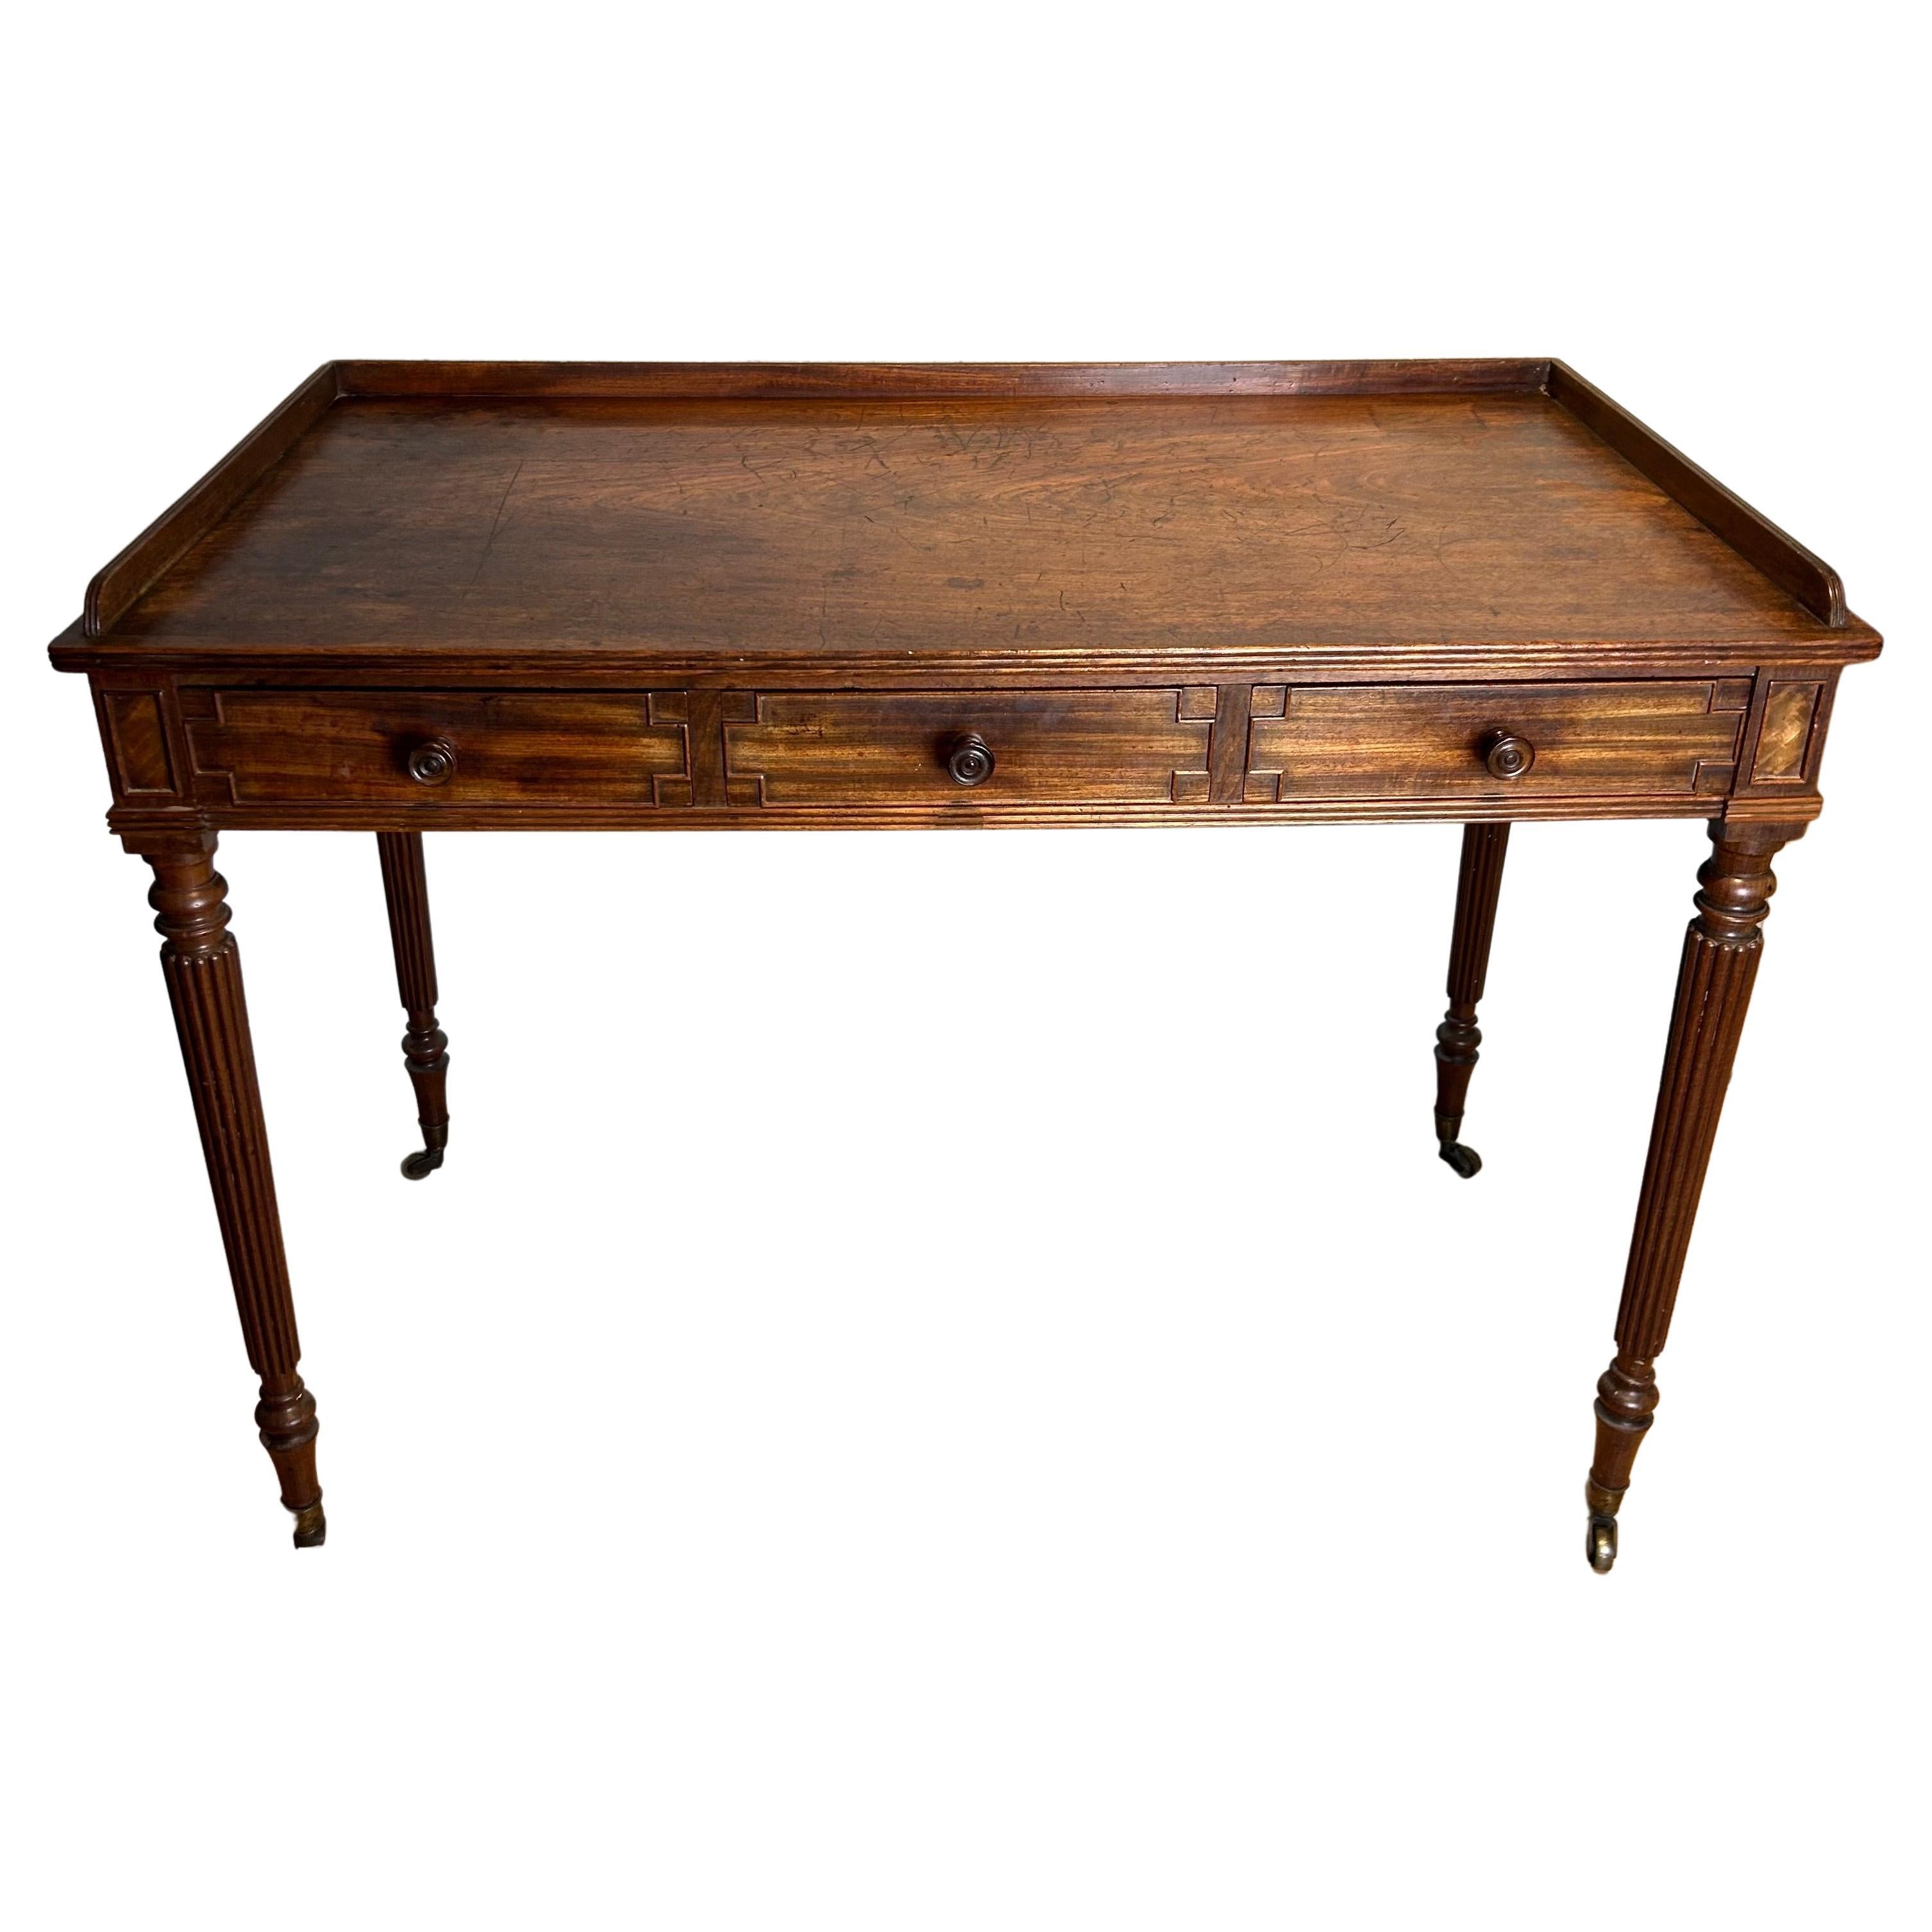  Regency Mahogany Dressing Table by Gillows of Lancaster & London